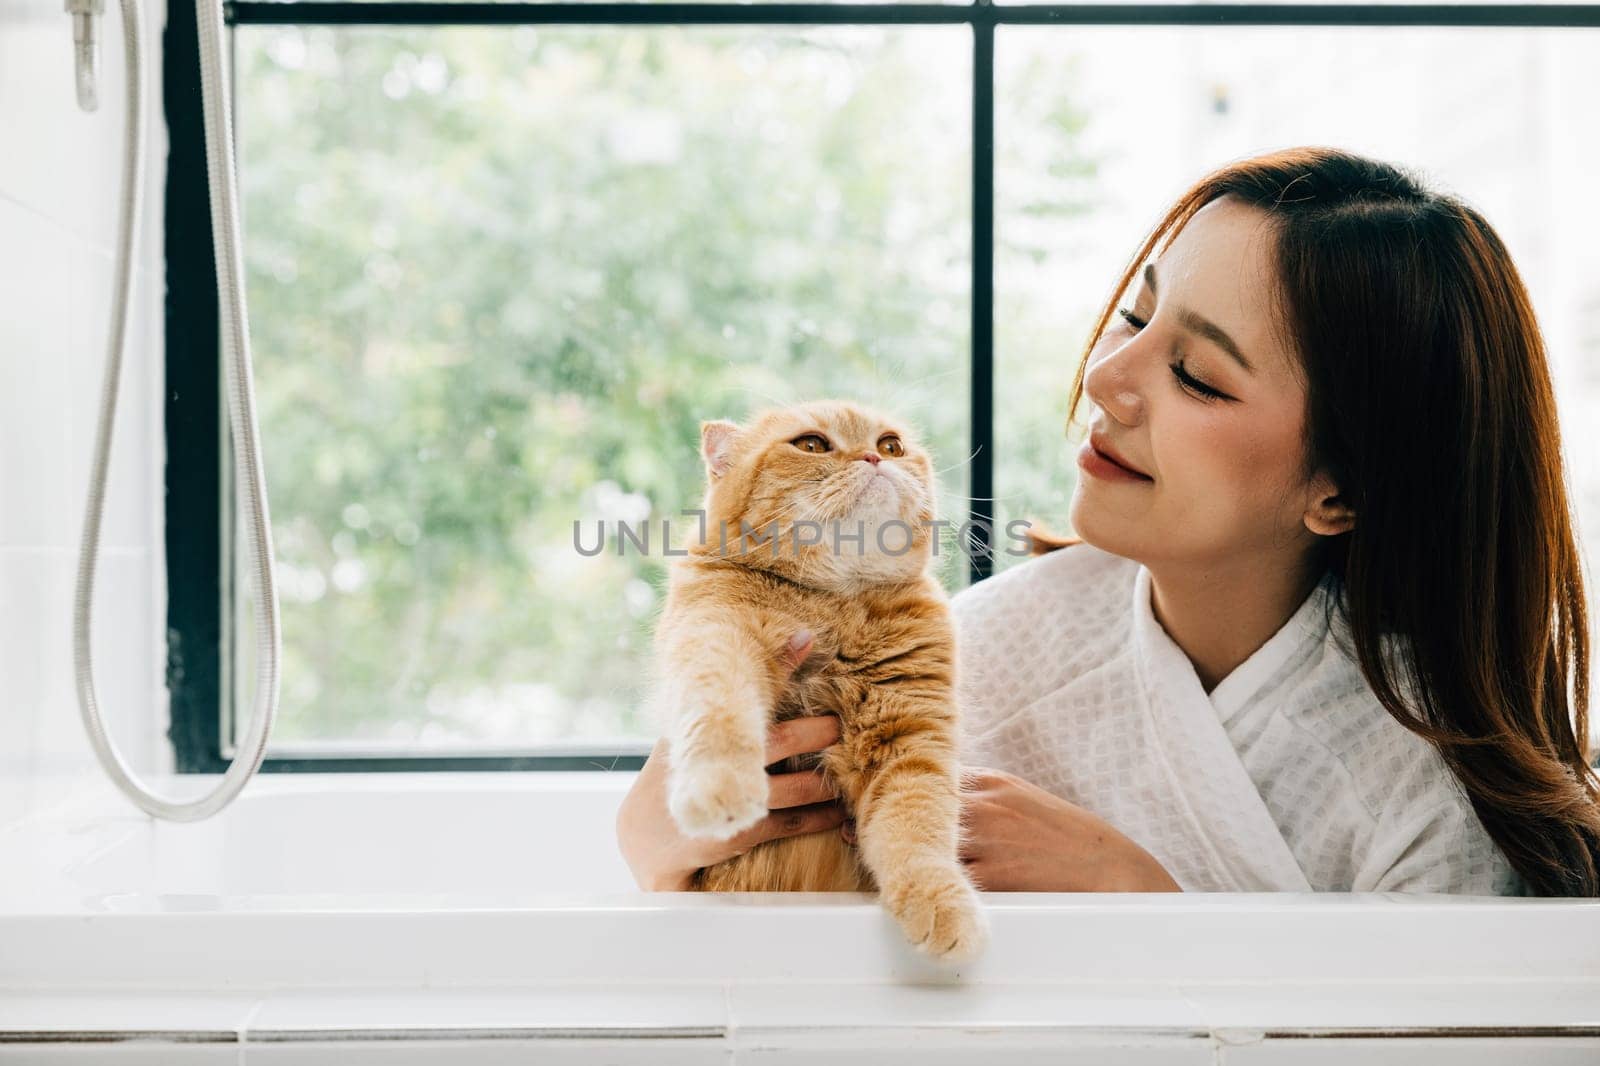 Bath time bonding, a woman holds her Scottish Fold cat in the bathtub, radiating happiness and the warmth of pet companionship in the bathroom.